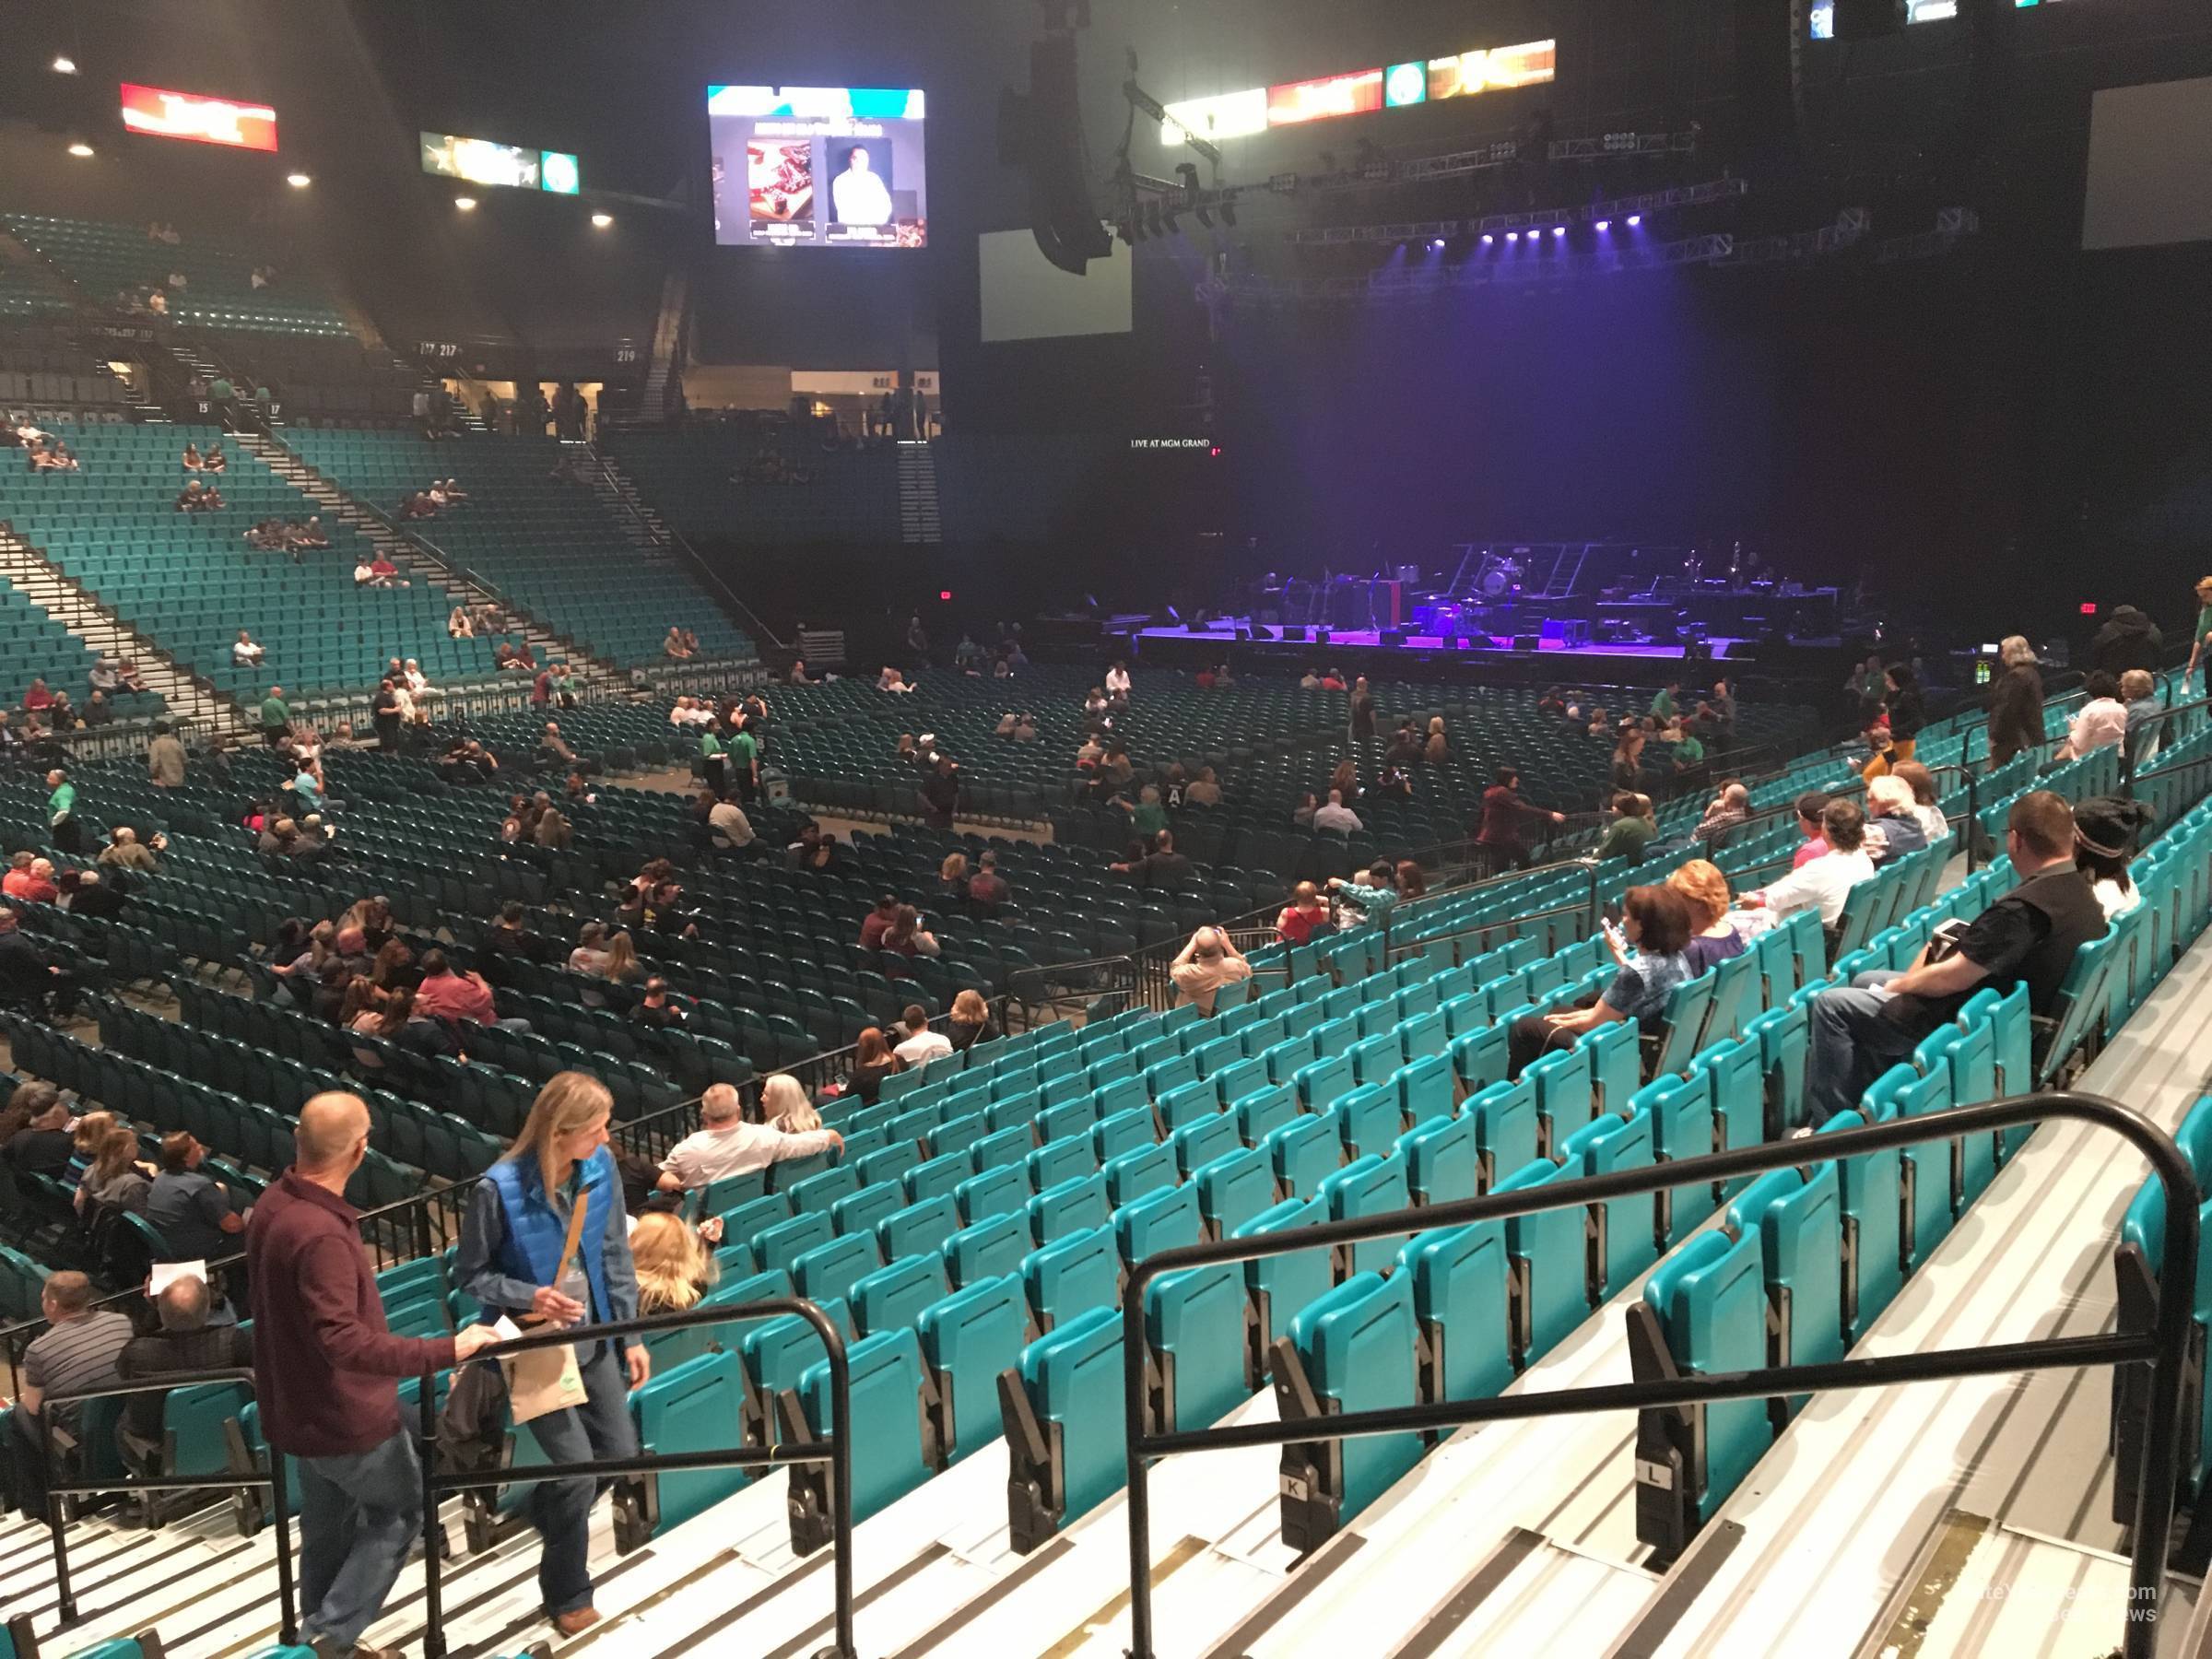 Mgm Grand Garden Arena Section 8 Rateyourseats Com